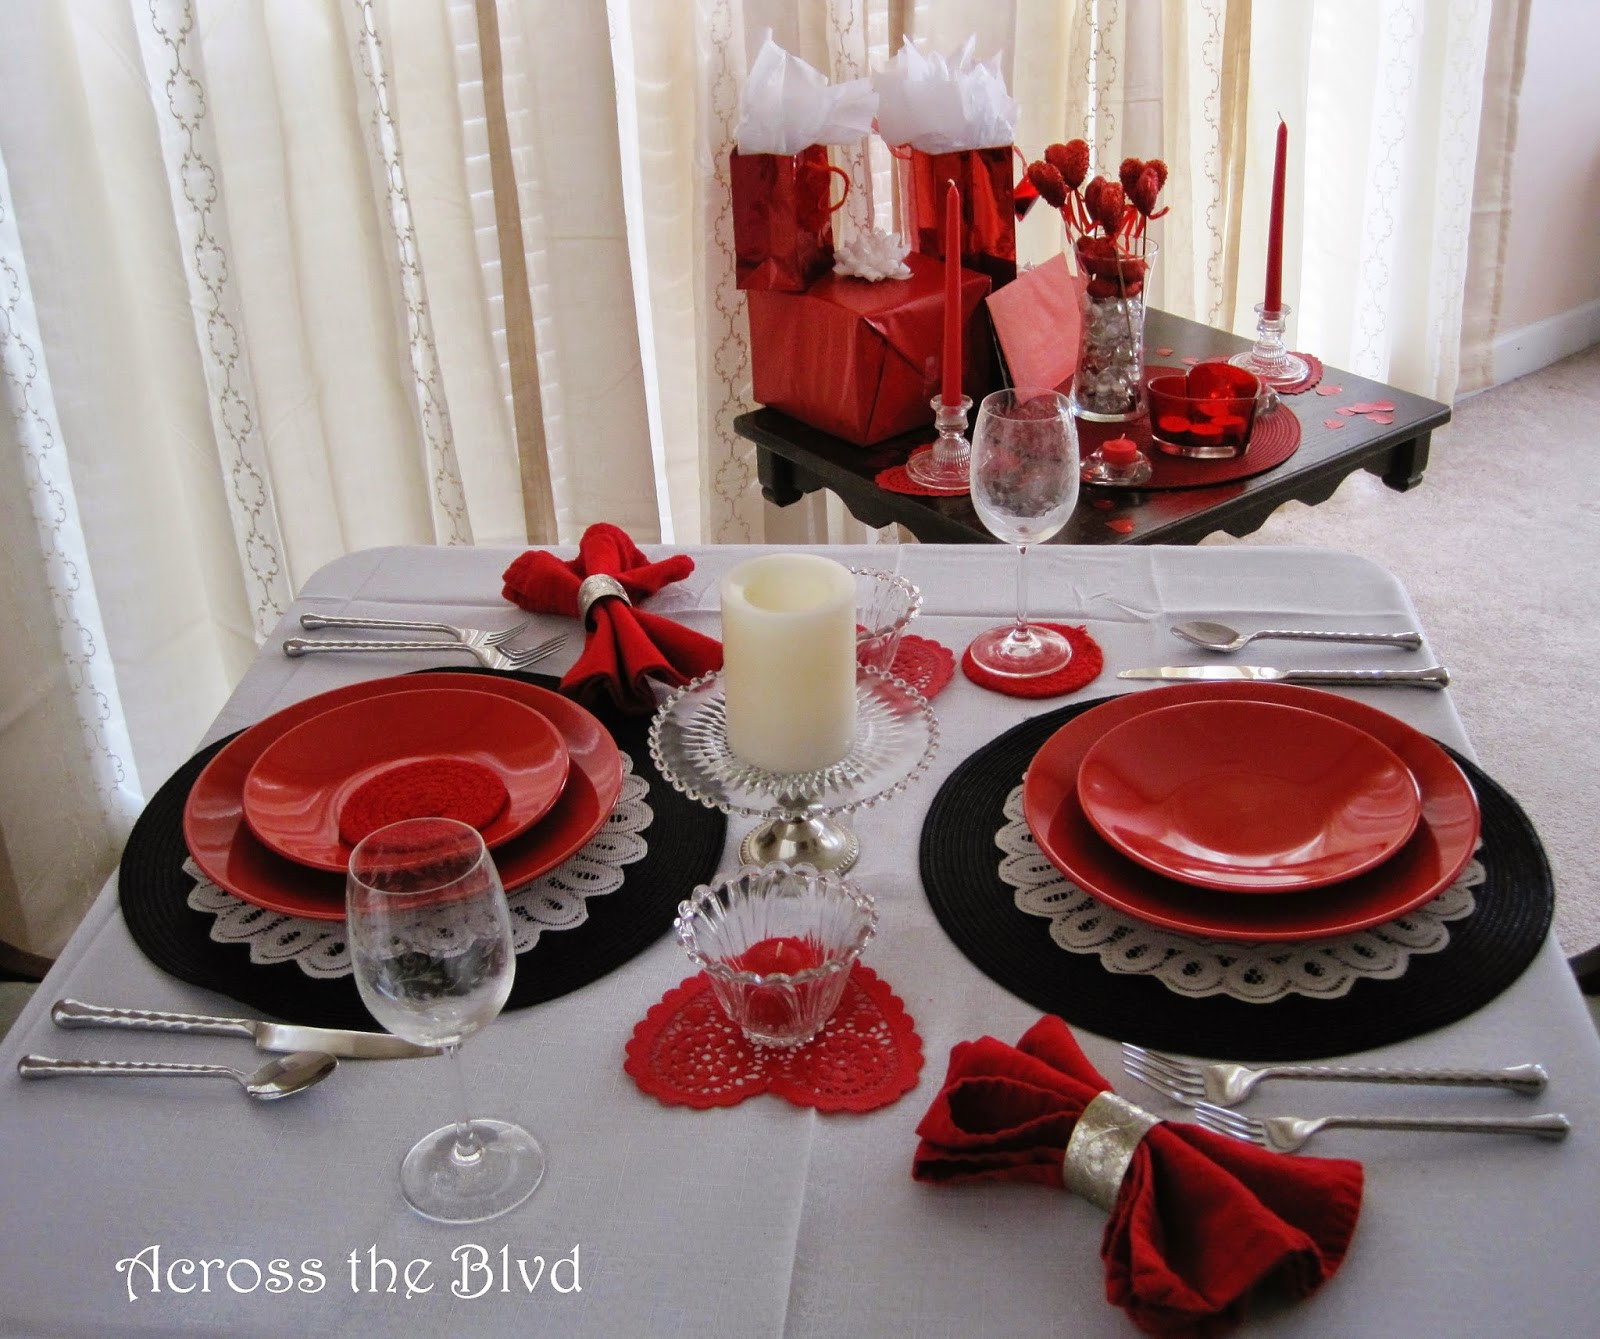 Valentine Dinners At Home
 Across the Boulevard Table For Two At Home for Valentine